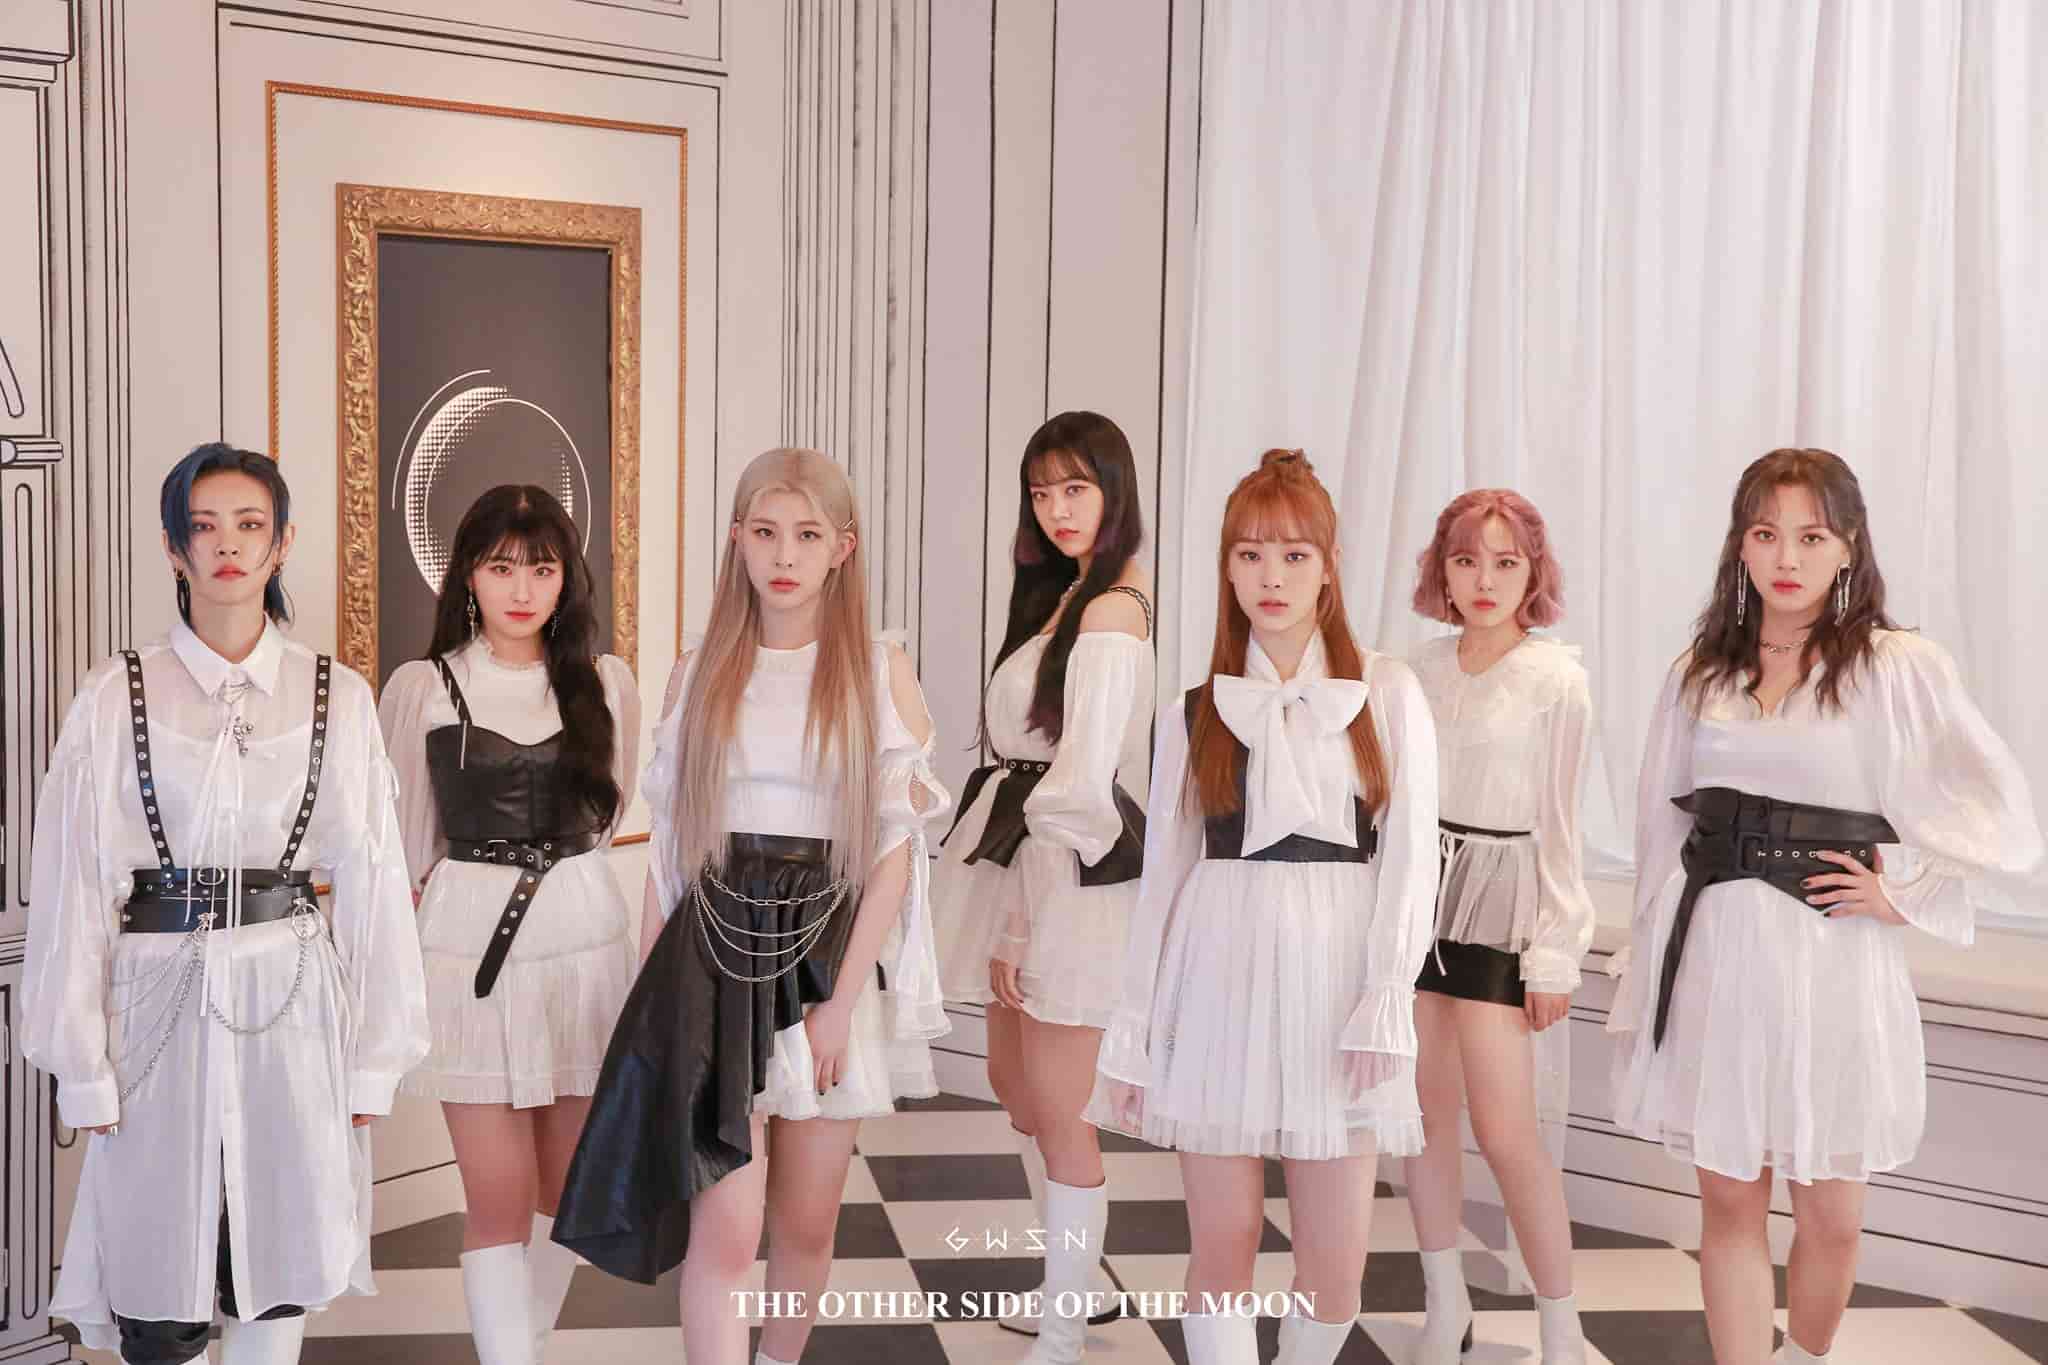 GWSN - Biography, Profile, Facts, and Career